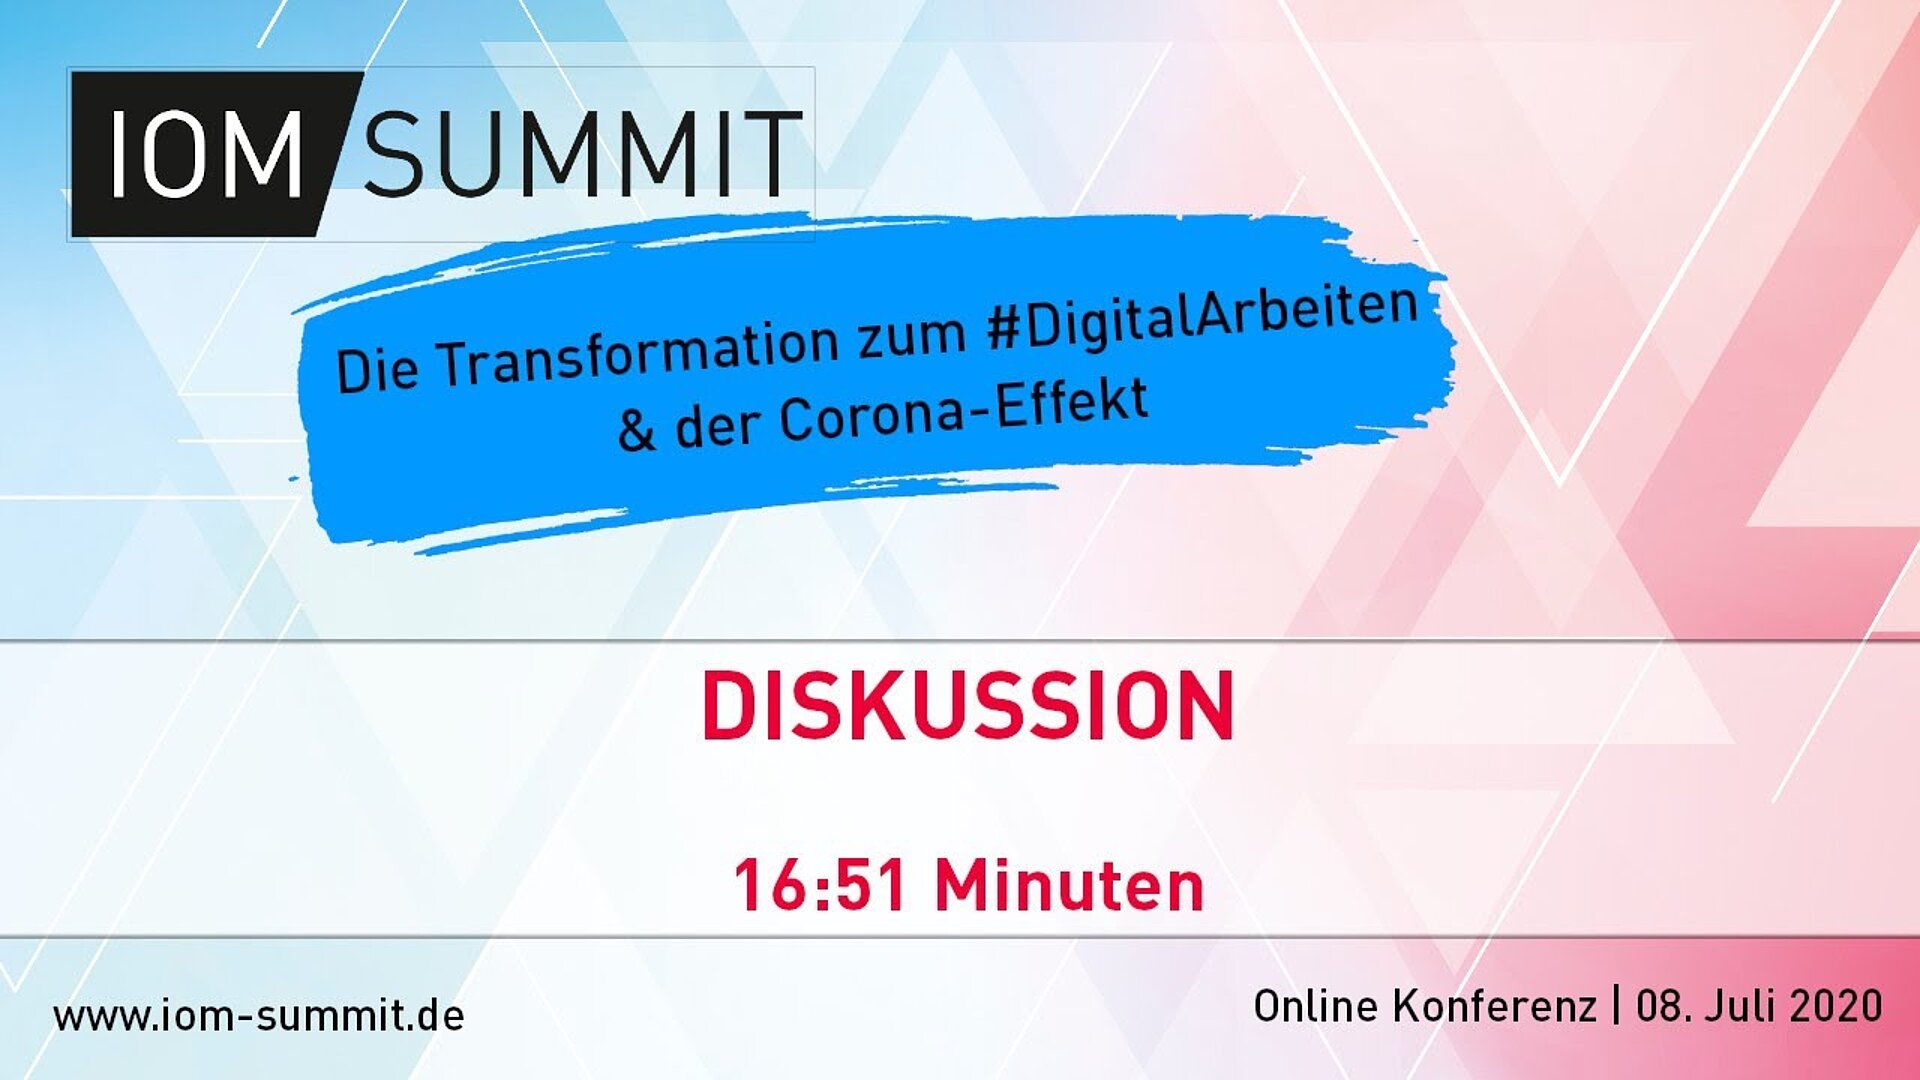 Diskussion: Challenges & recommendations for the digital transformation of the organization